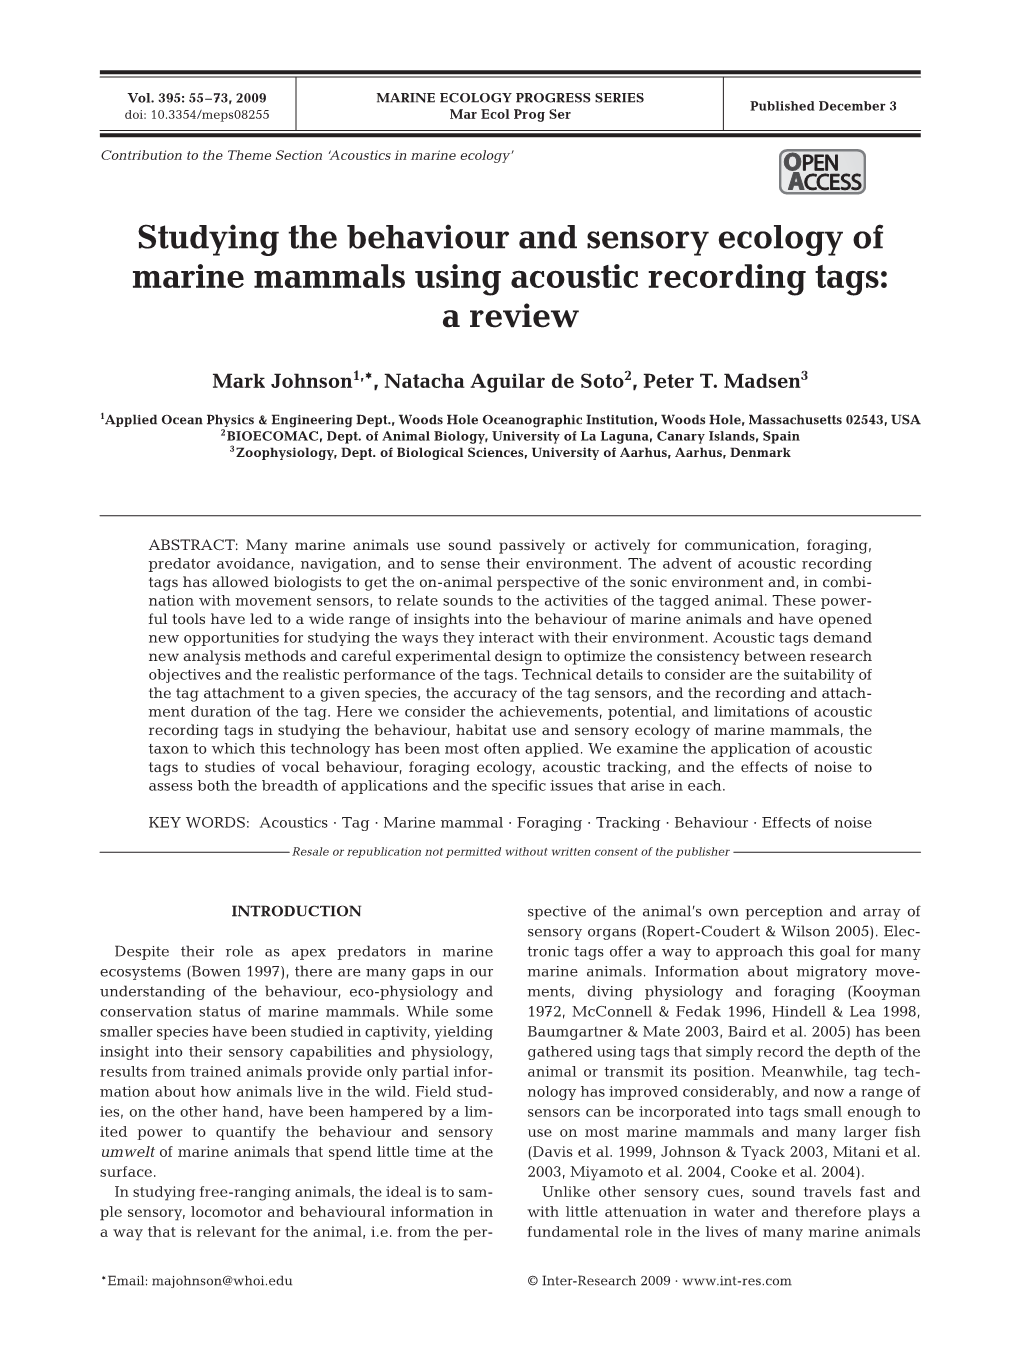 Studying the Behaviour and Sensory Ecology of Marine Mammals Using Acoustic Recording Tags: a Review